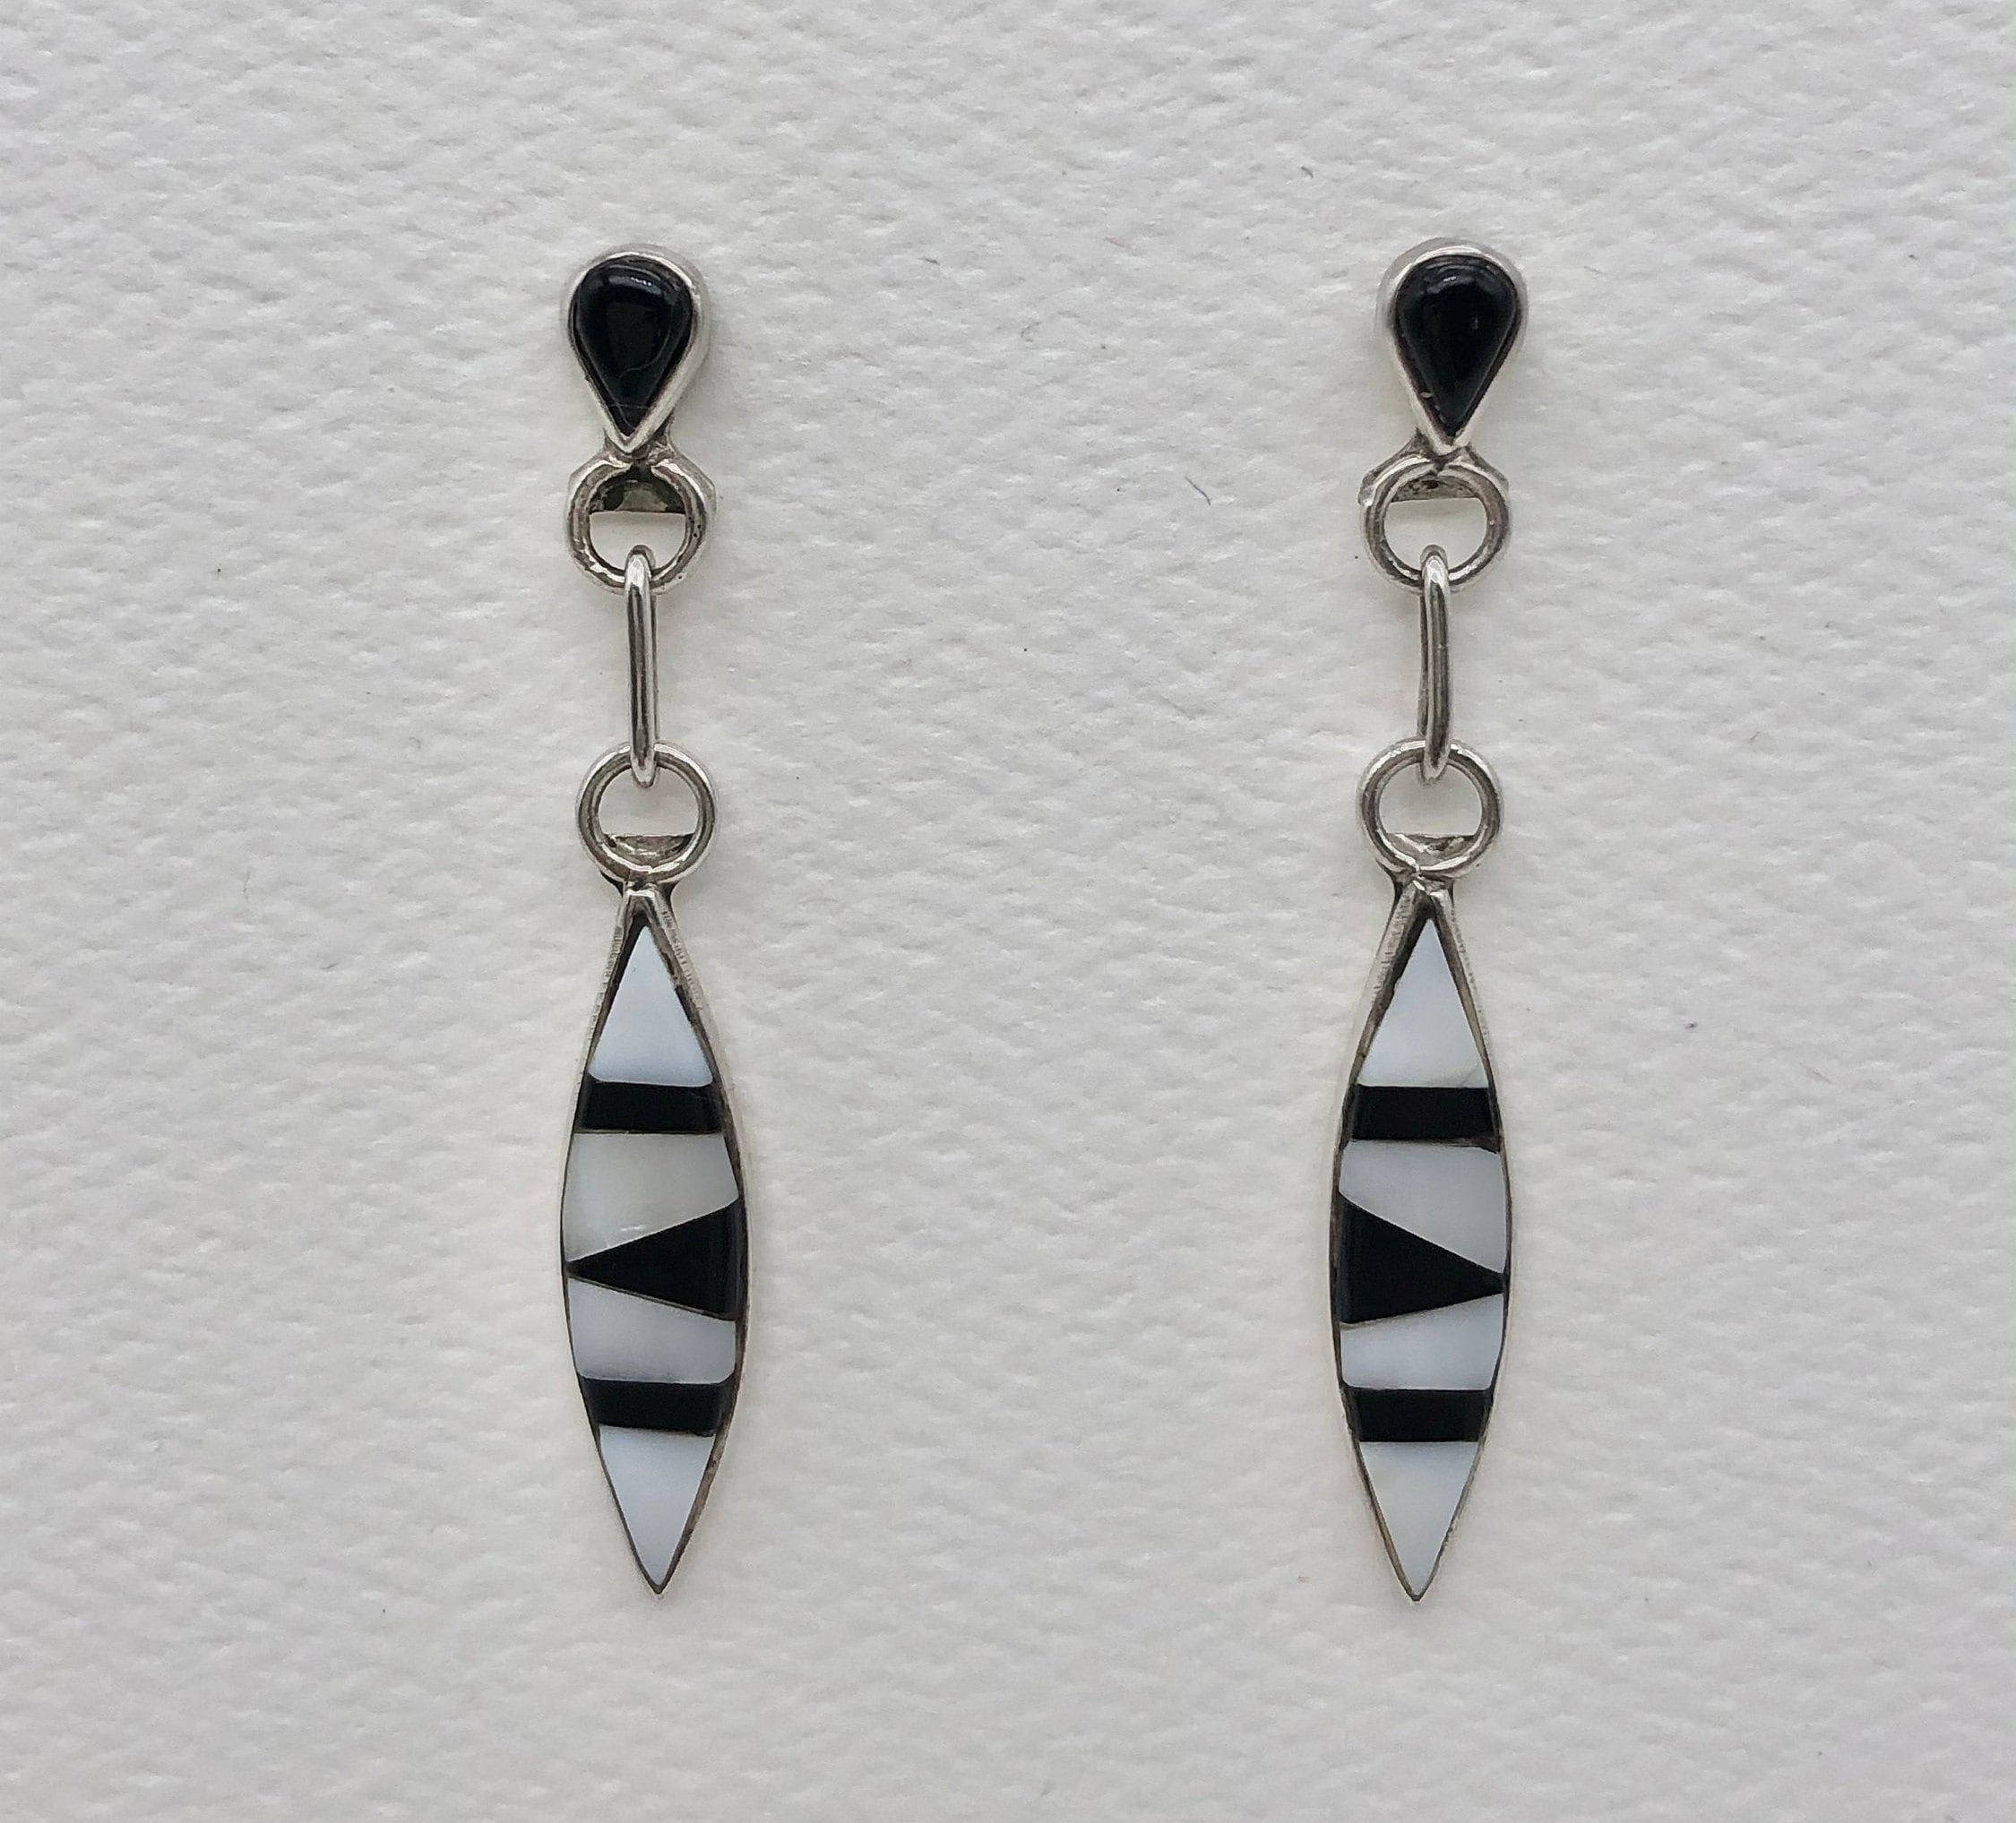 Details about   Earrings Mother-of-Pearl/Onyx Blk Silver Plated Dangle 5.25" Handmade GB  New 